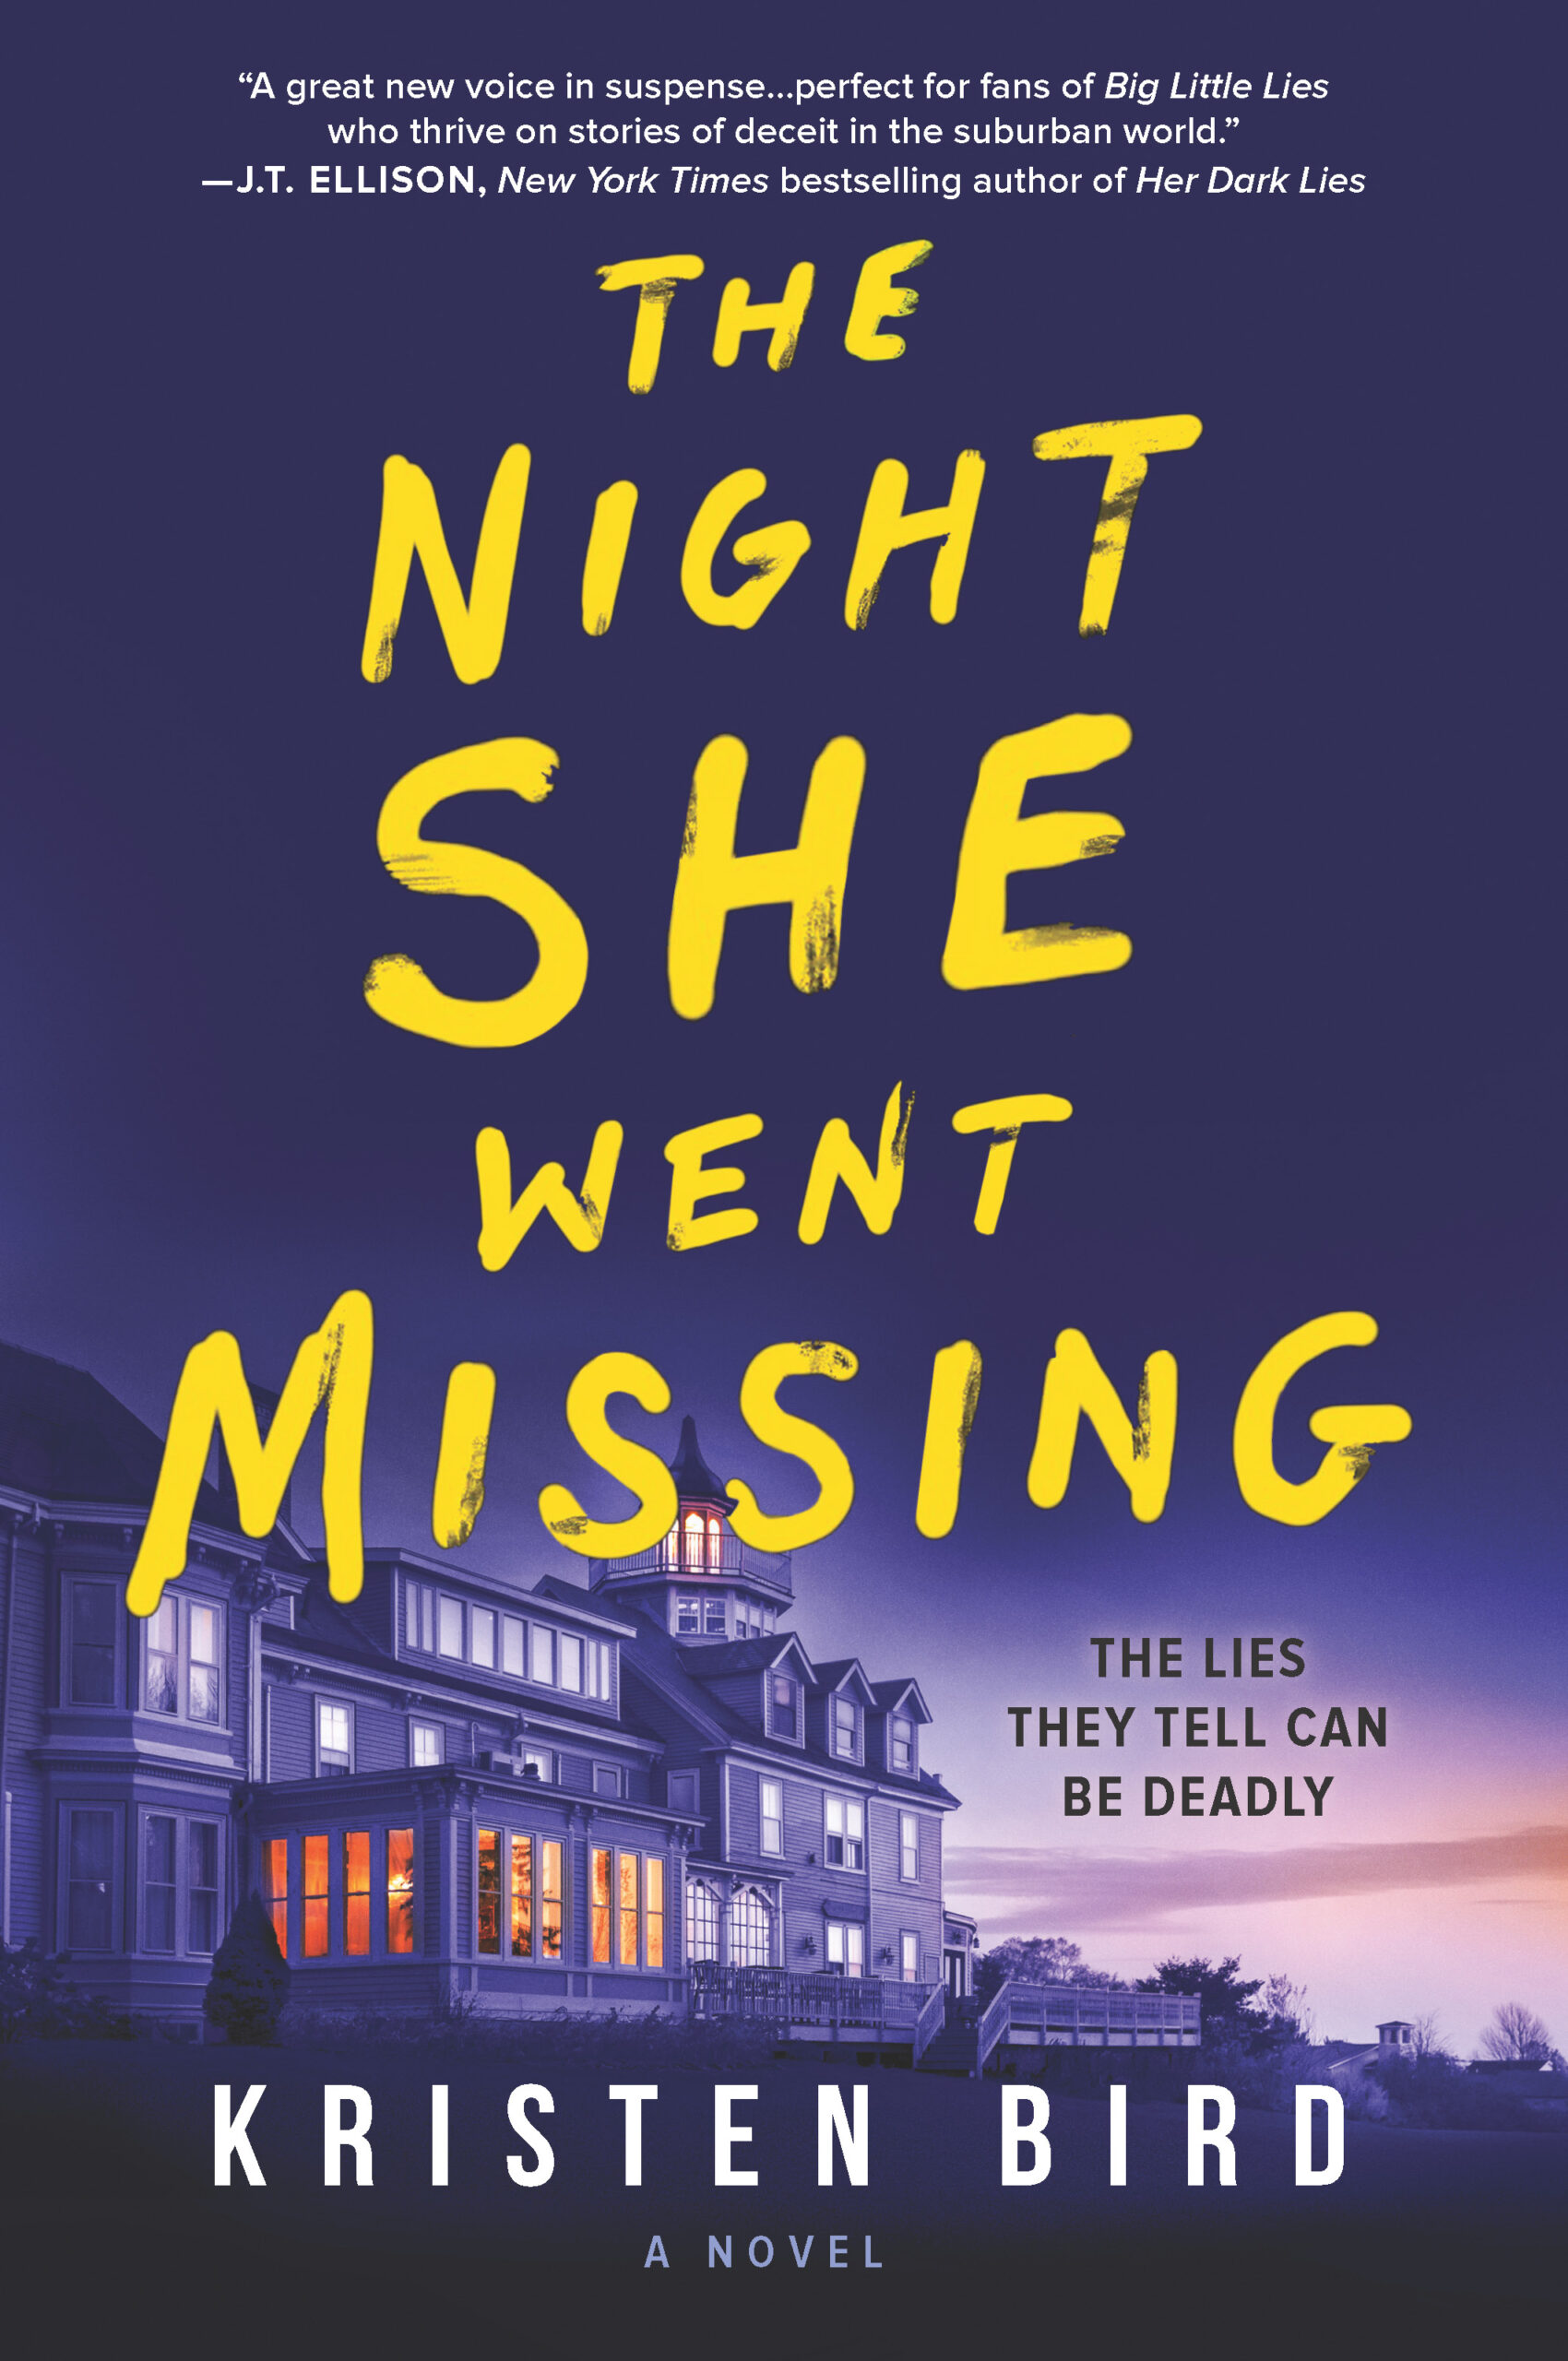 Review The Night She Went Missing by Kristen Bird